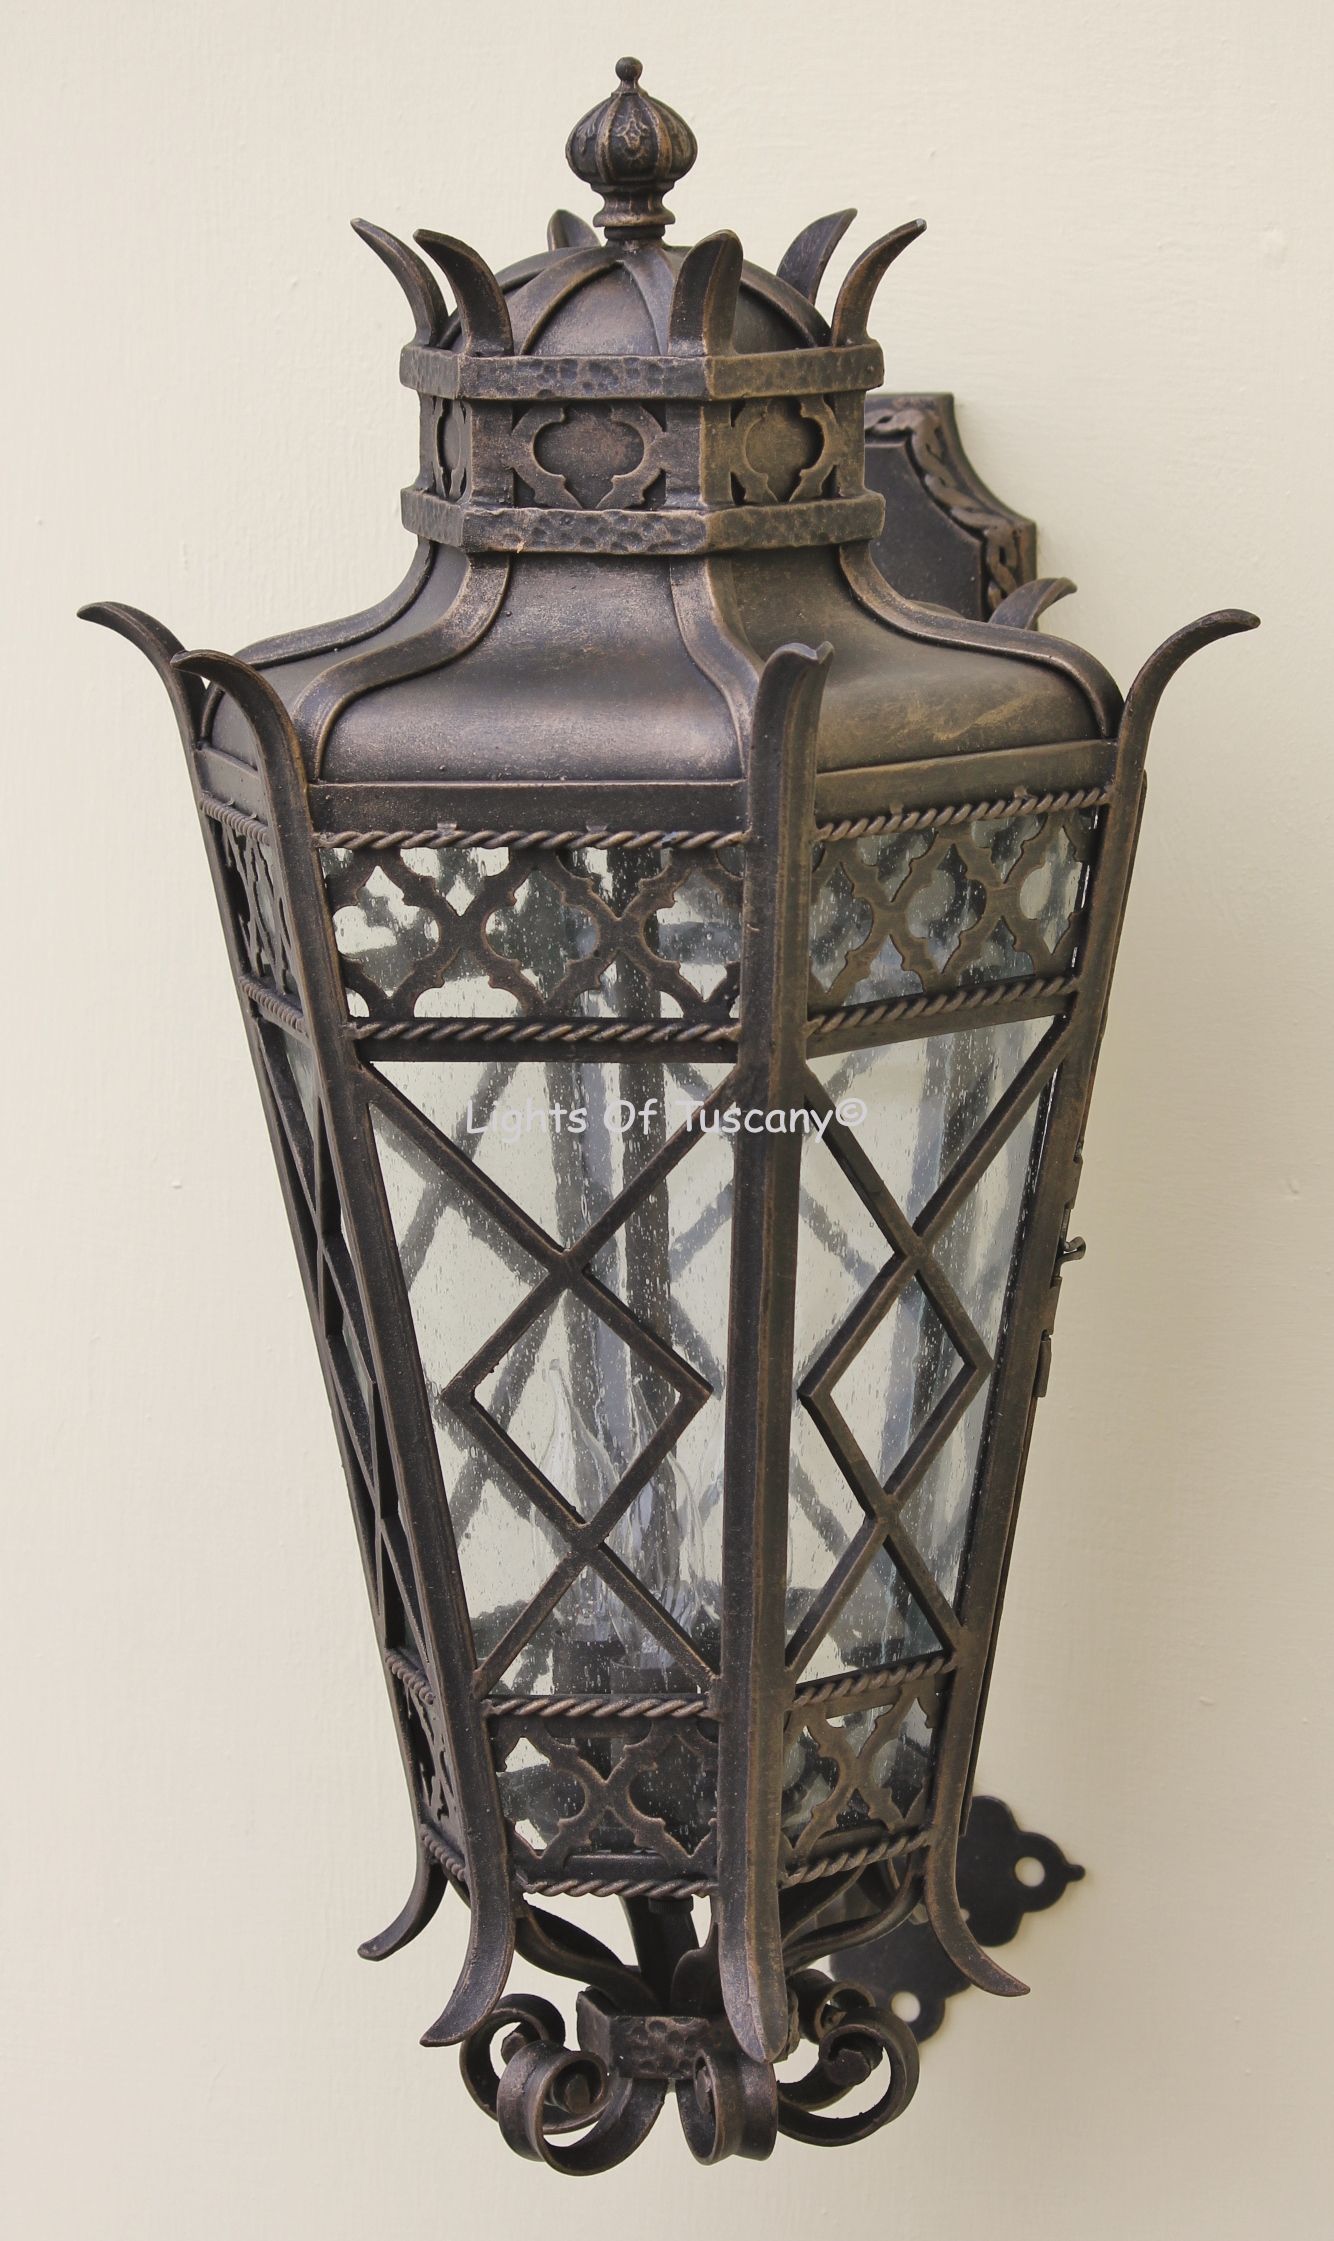 Lights of Tuscany 7181-3 Tuscan - Mediterranean Style Outdoor Wall Light